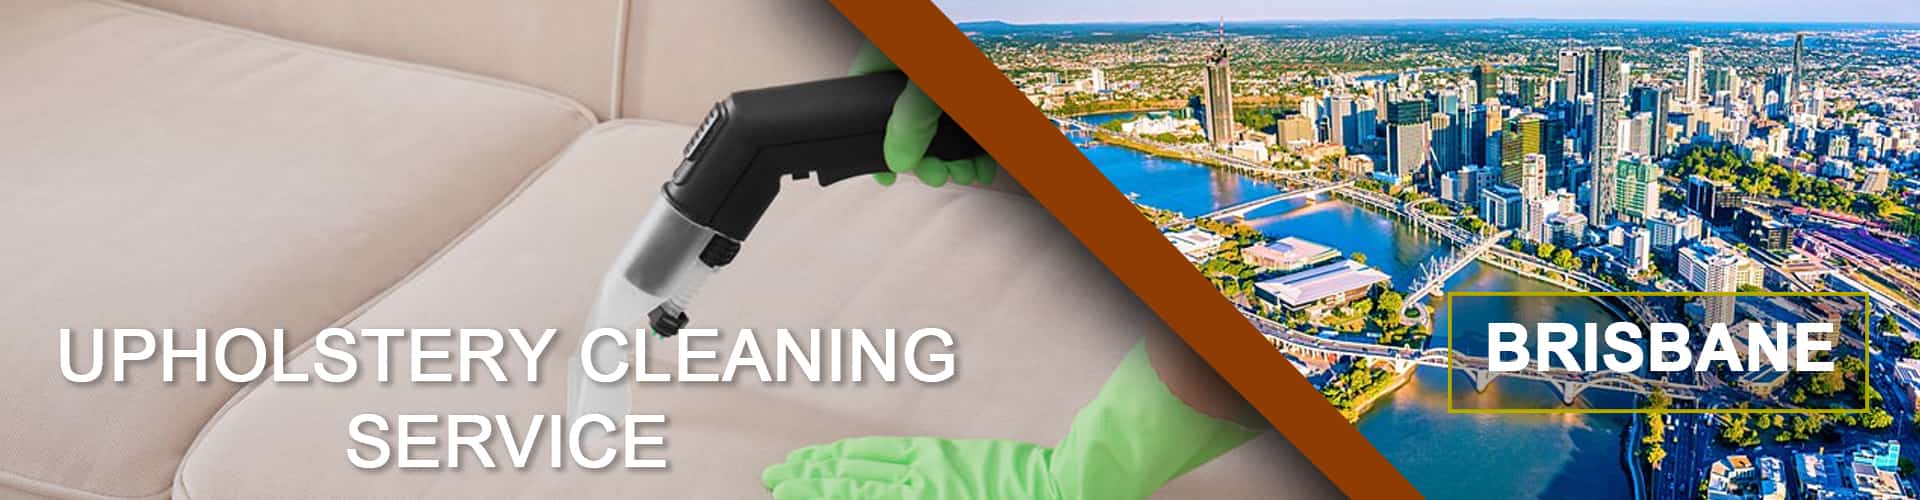 UPHOLSTERY CLEANING BRISBANE